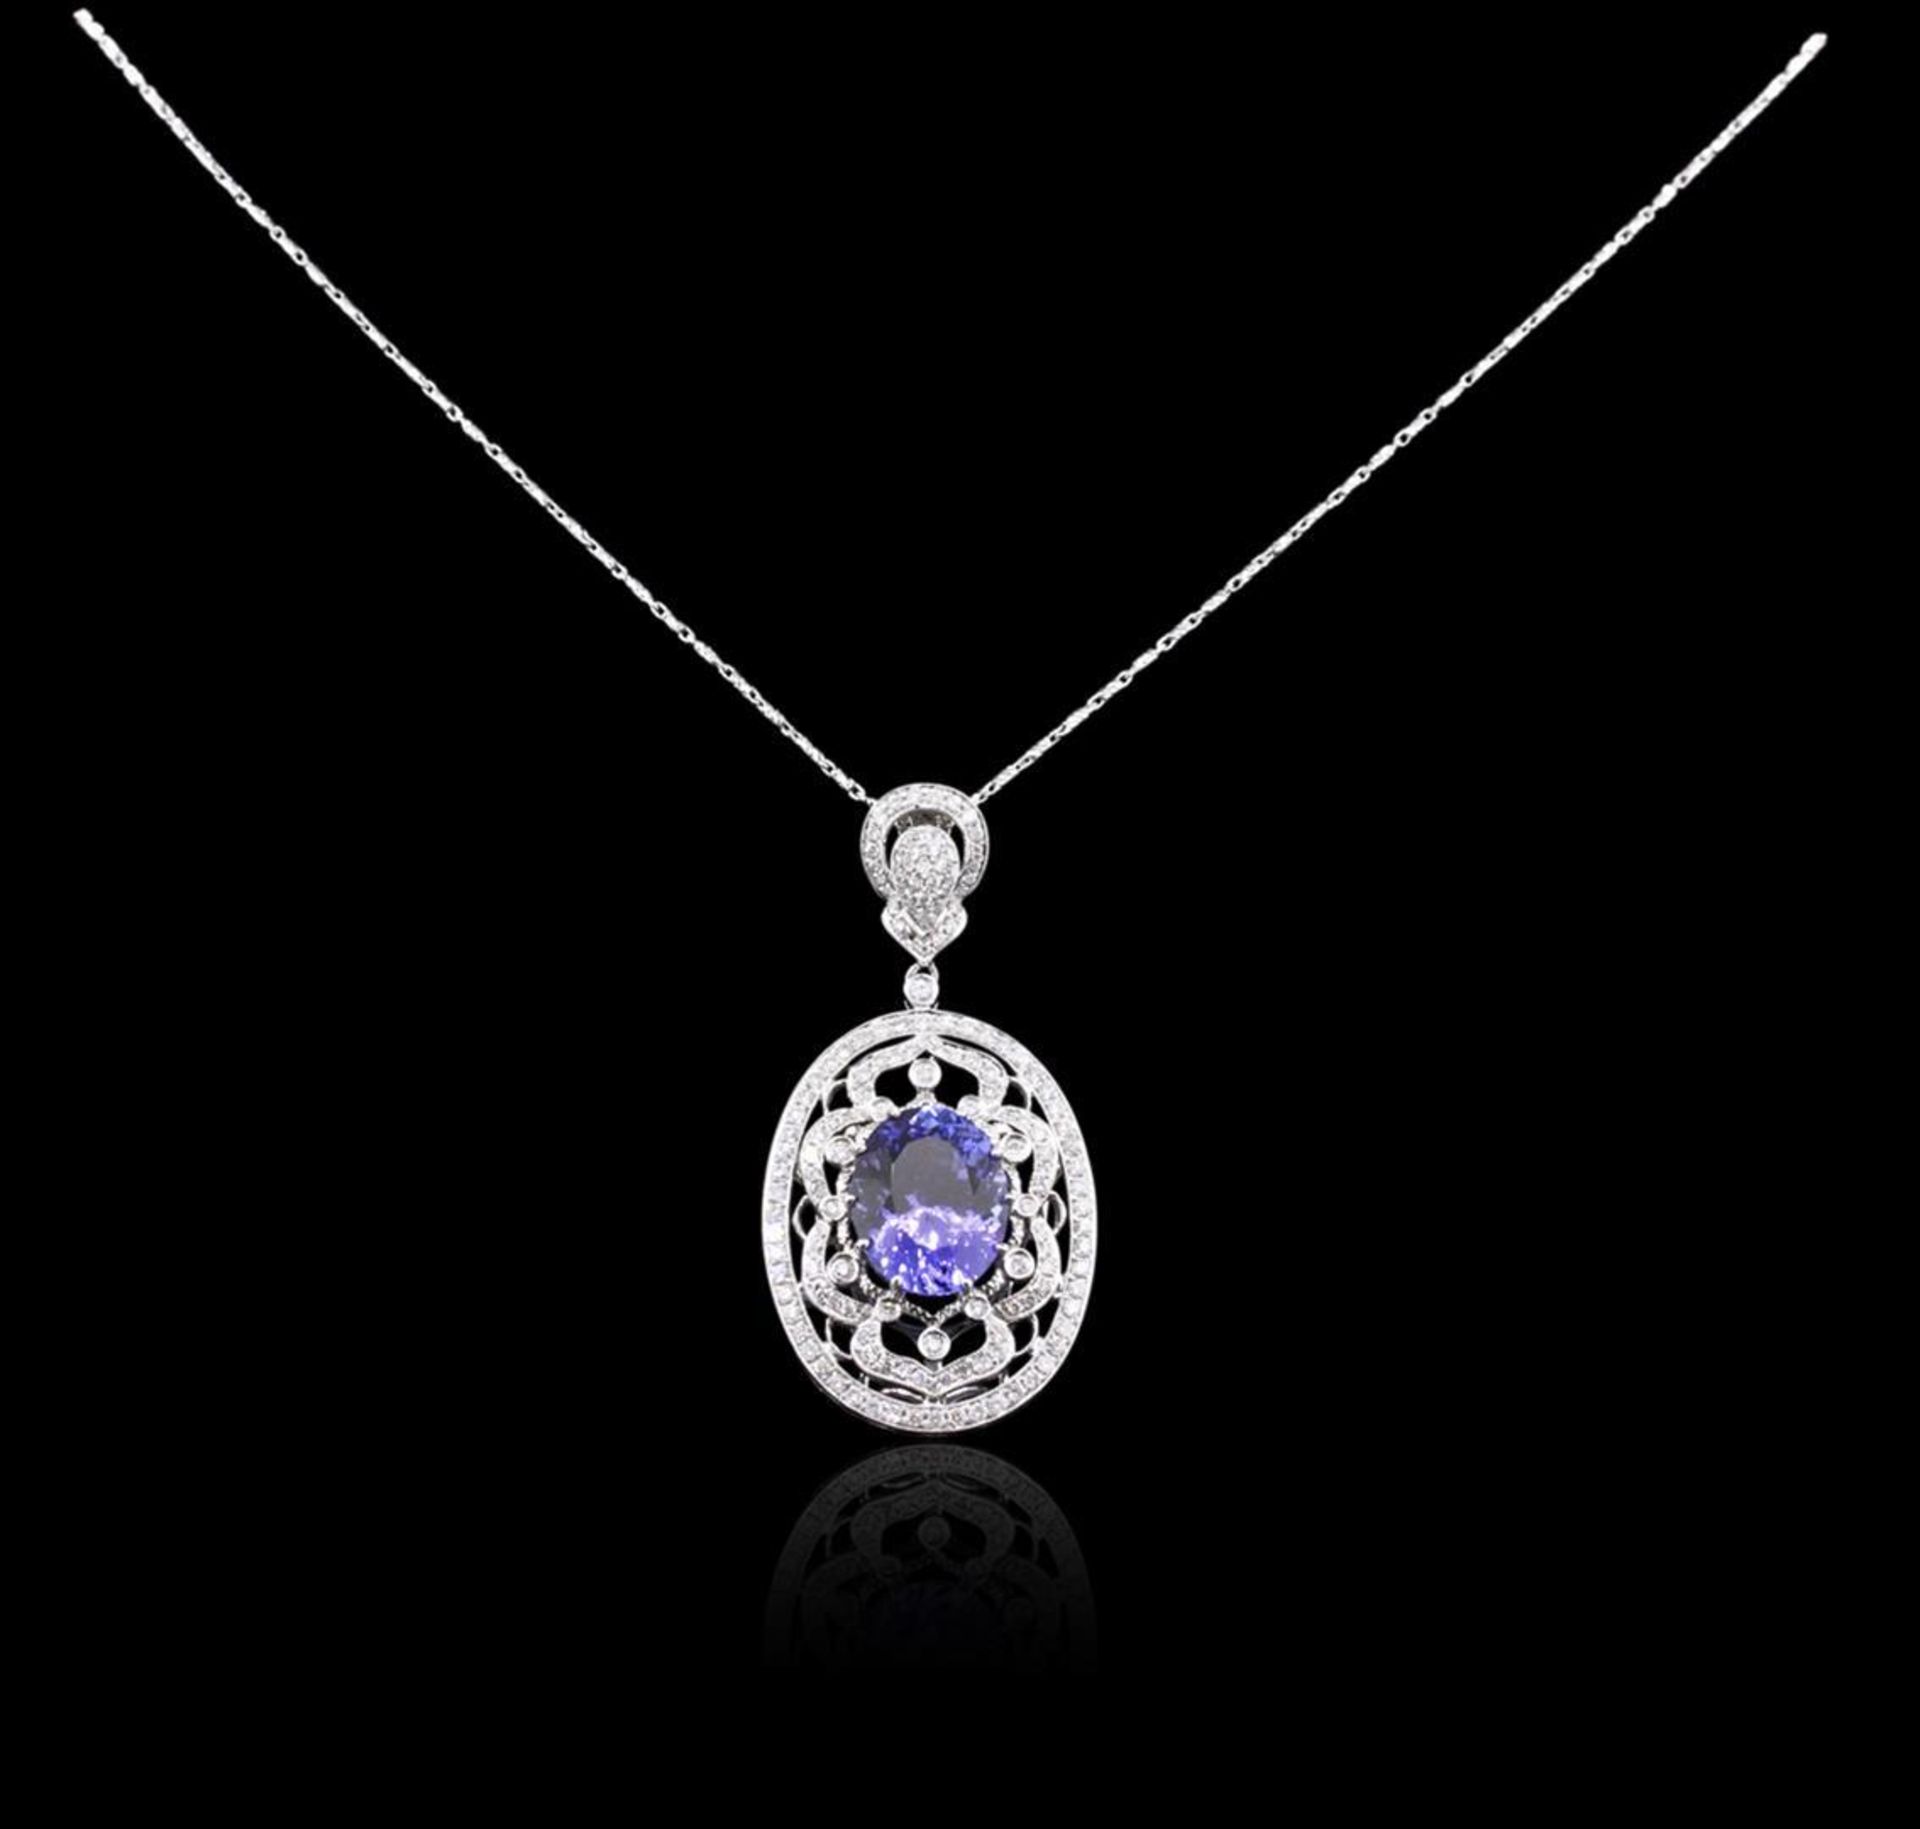 14KT White Gold 8.01 ctw Tanzanite and Diamond Pendant With Chain - Image 2 of 4